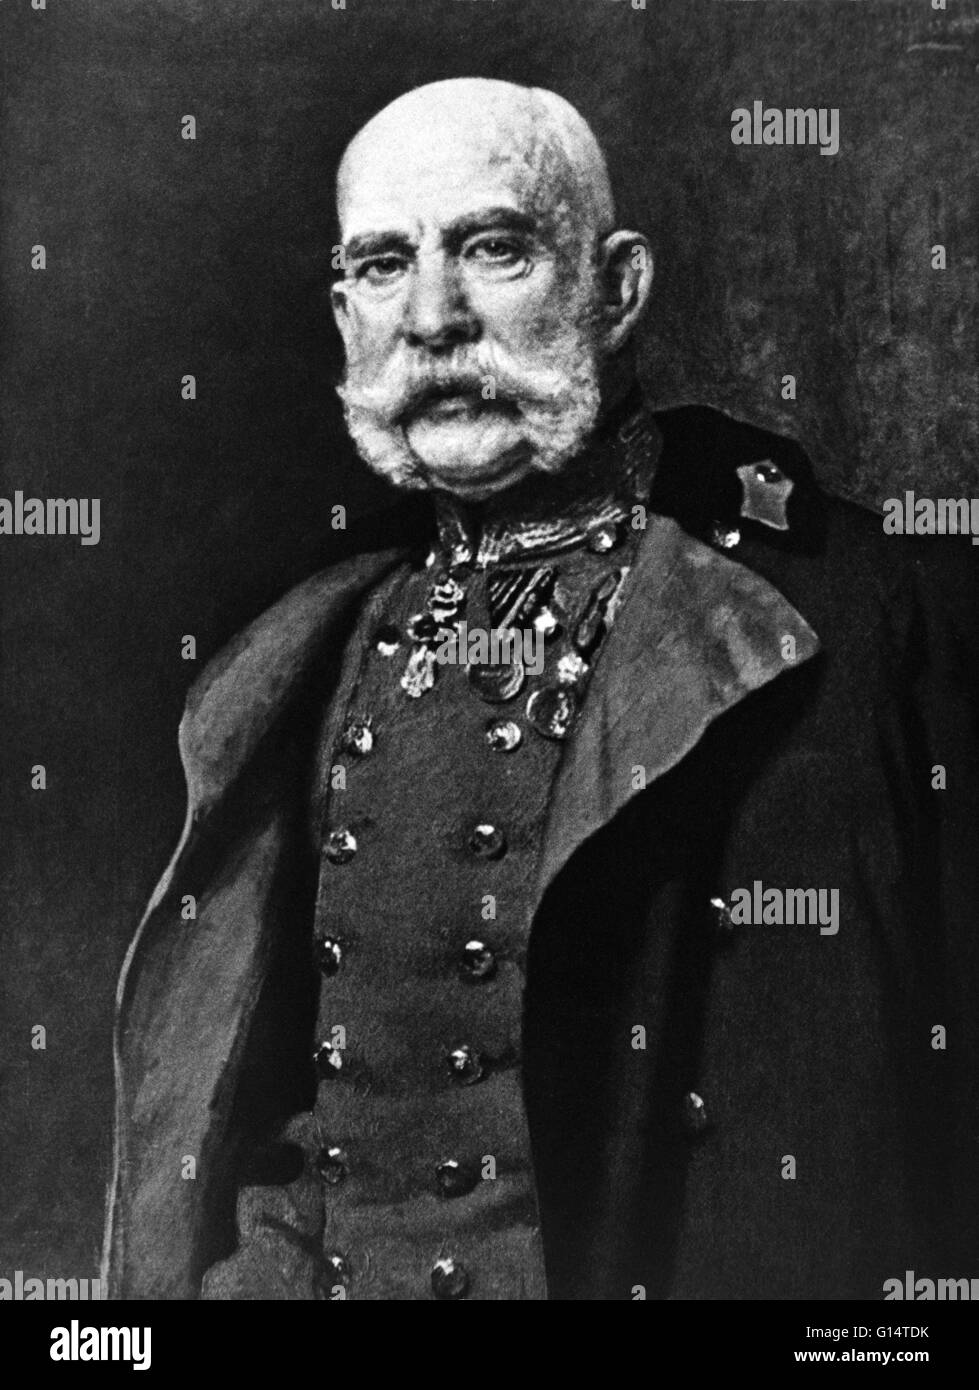 Franz Joseph I or Francis Joseph I (1830-1916) was Emperor of Austria, King of Bohemia, King of Croatia, Apostolic King of Hungary, King of Galicia and Lodomeria and Grand Duke of Cracow from 1848 until his death in 1916. Franz Joseph spent his early reig Stock Photo